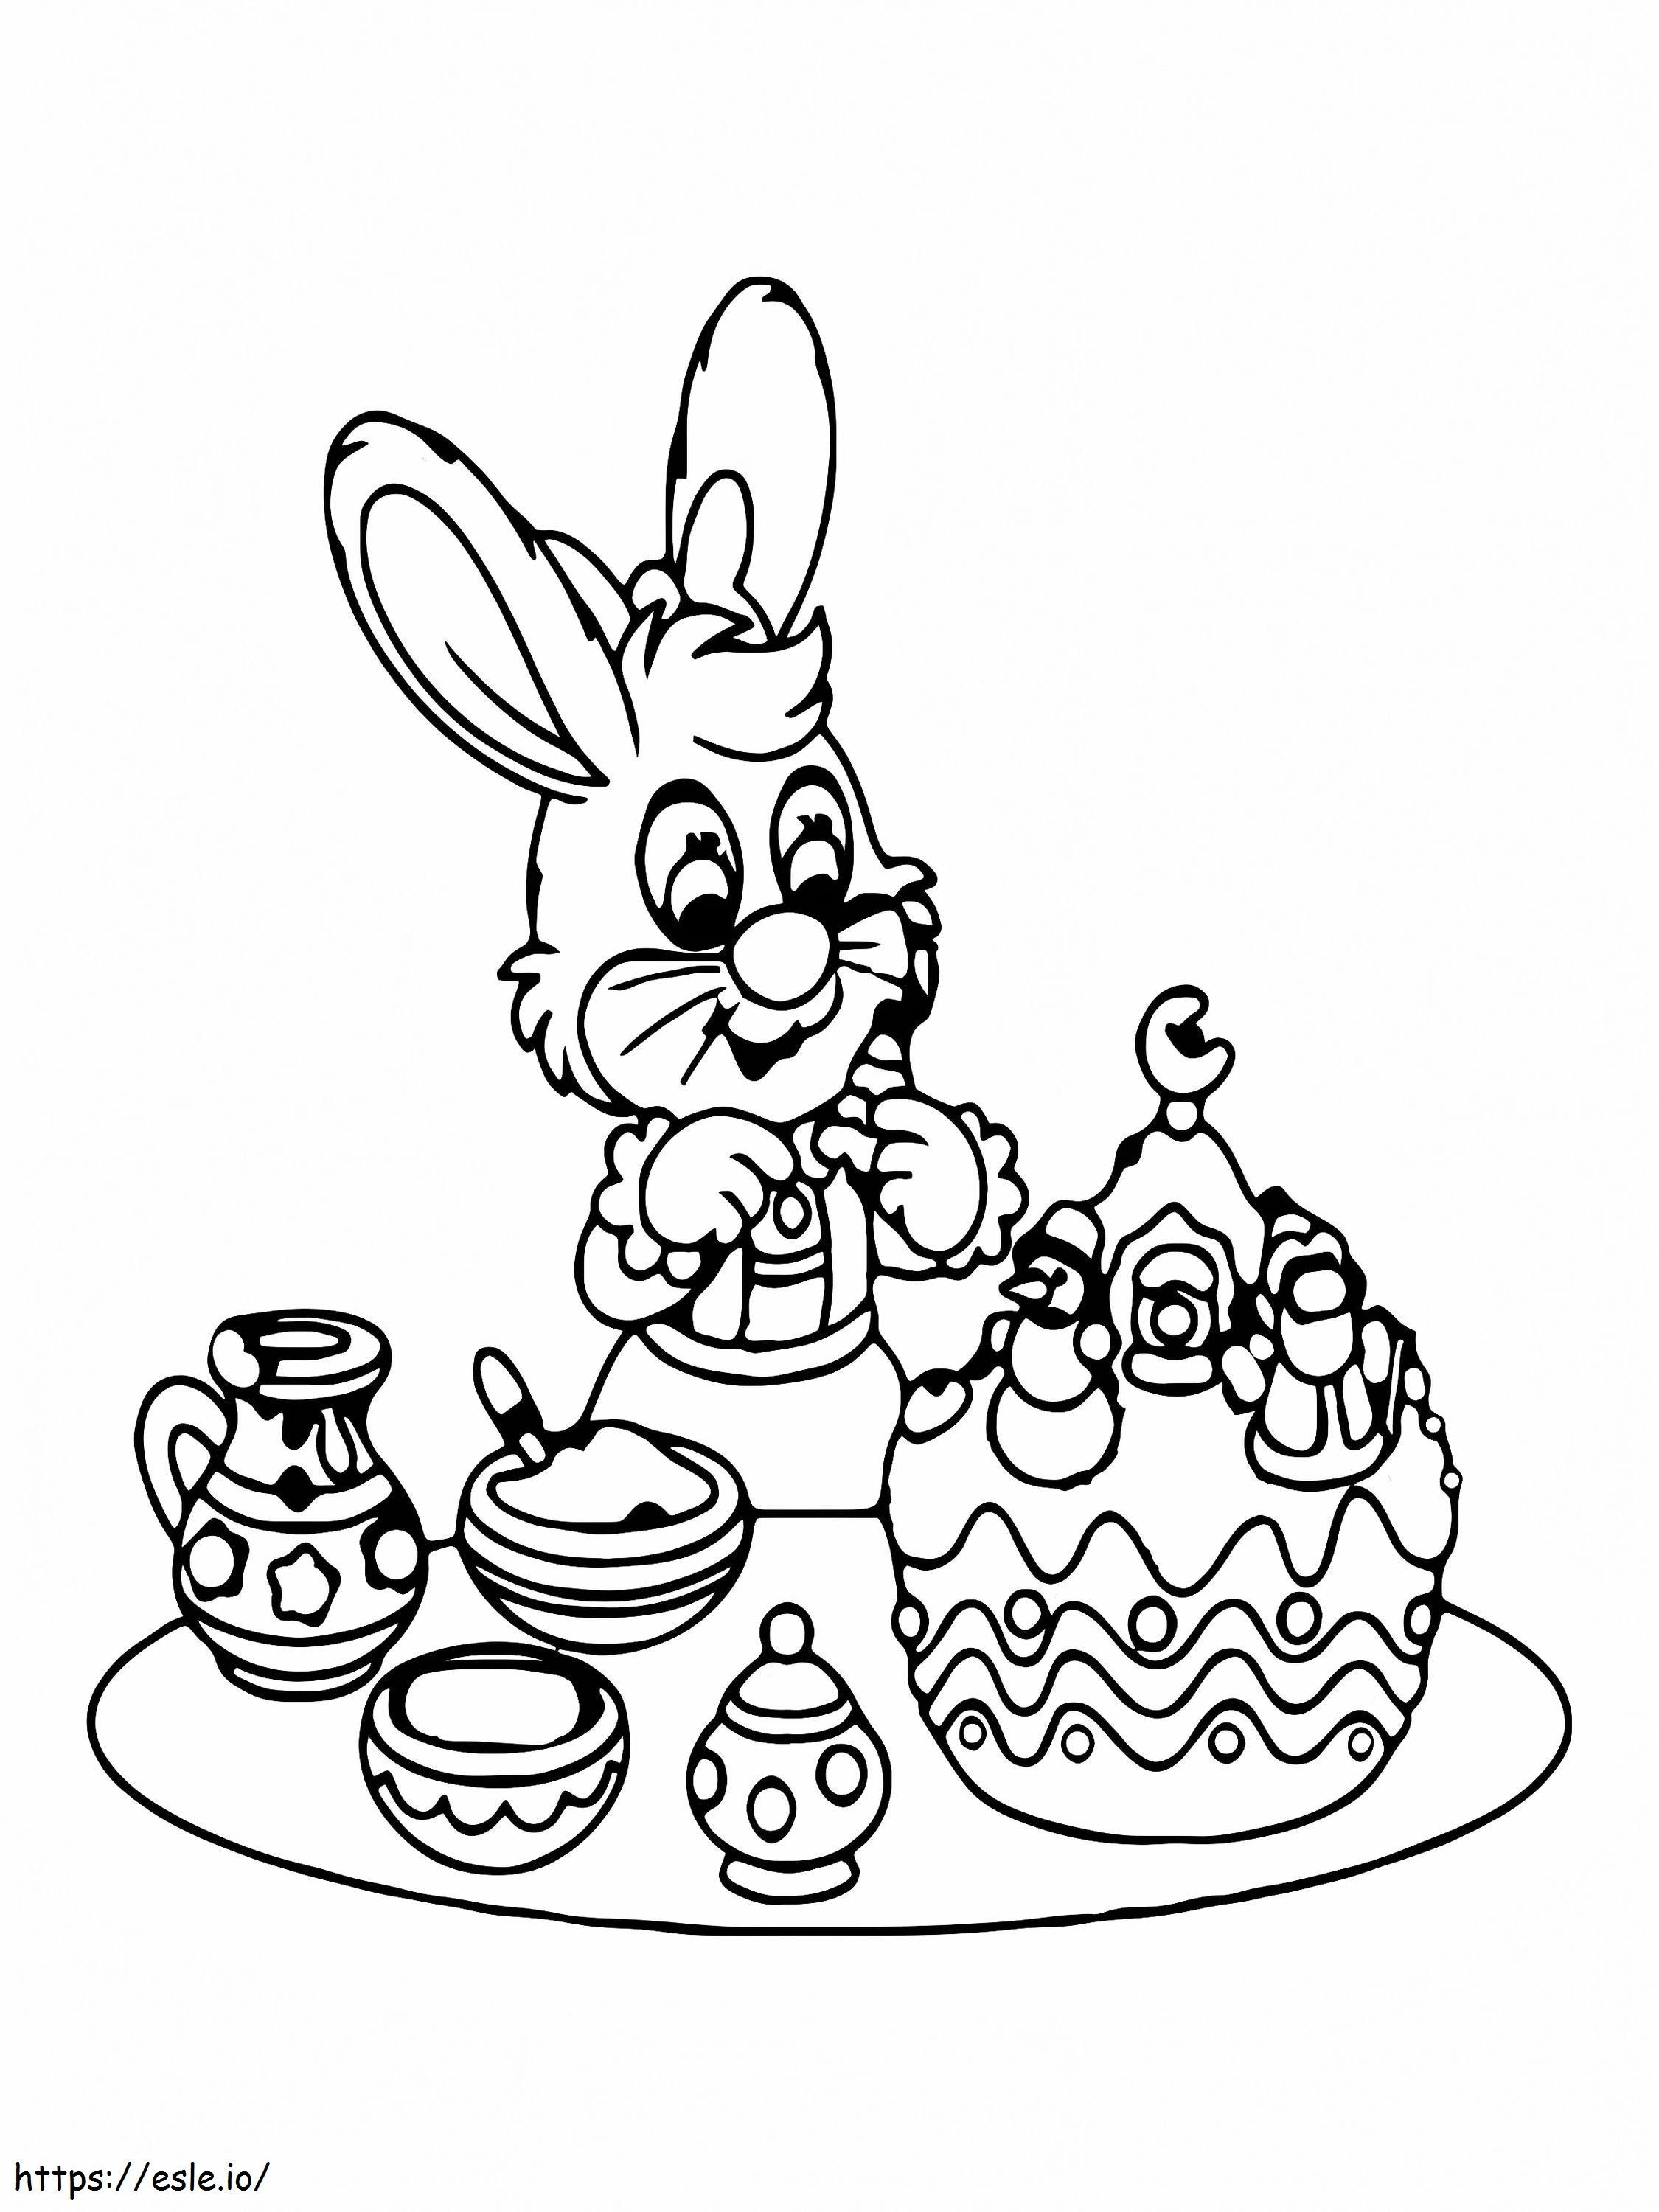 Christmas Bunny With A Cake coloring page